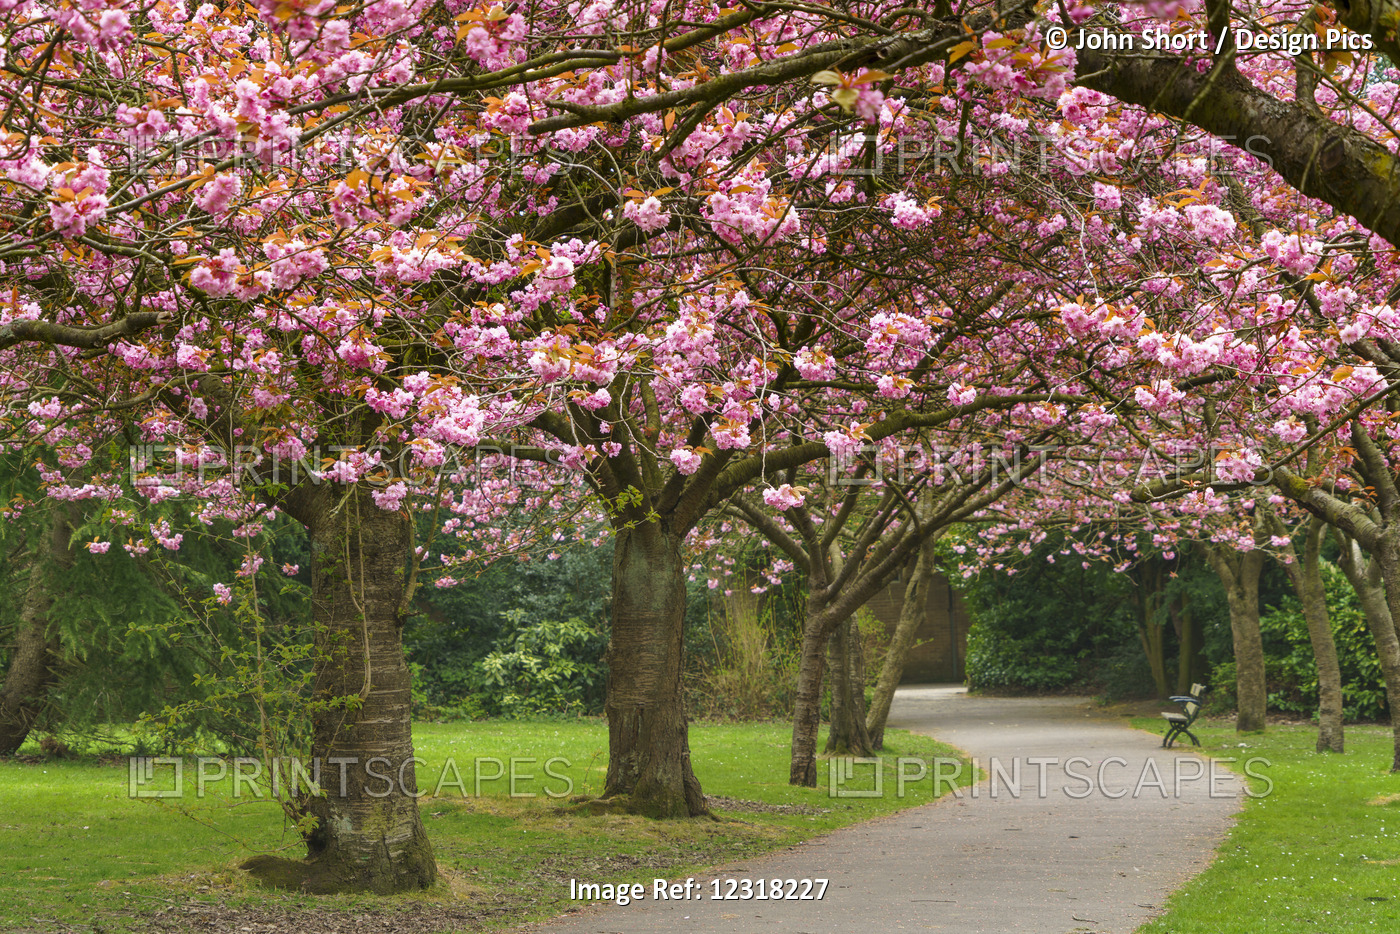 A Trail Lined With Trees In Pink Blossoms; Gateshead, Tyne And Wear, England